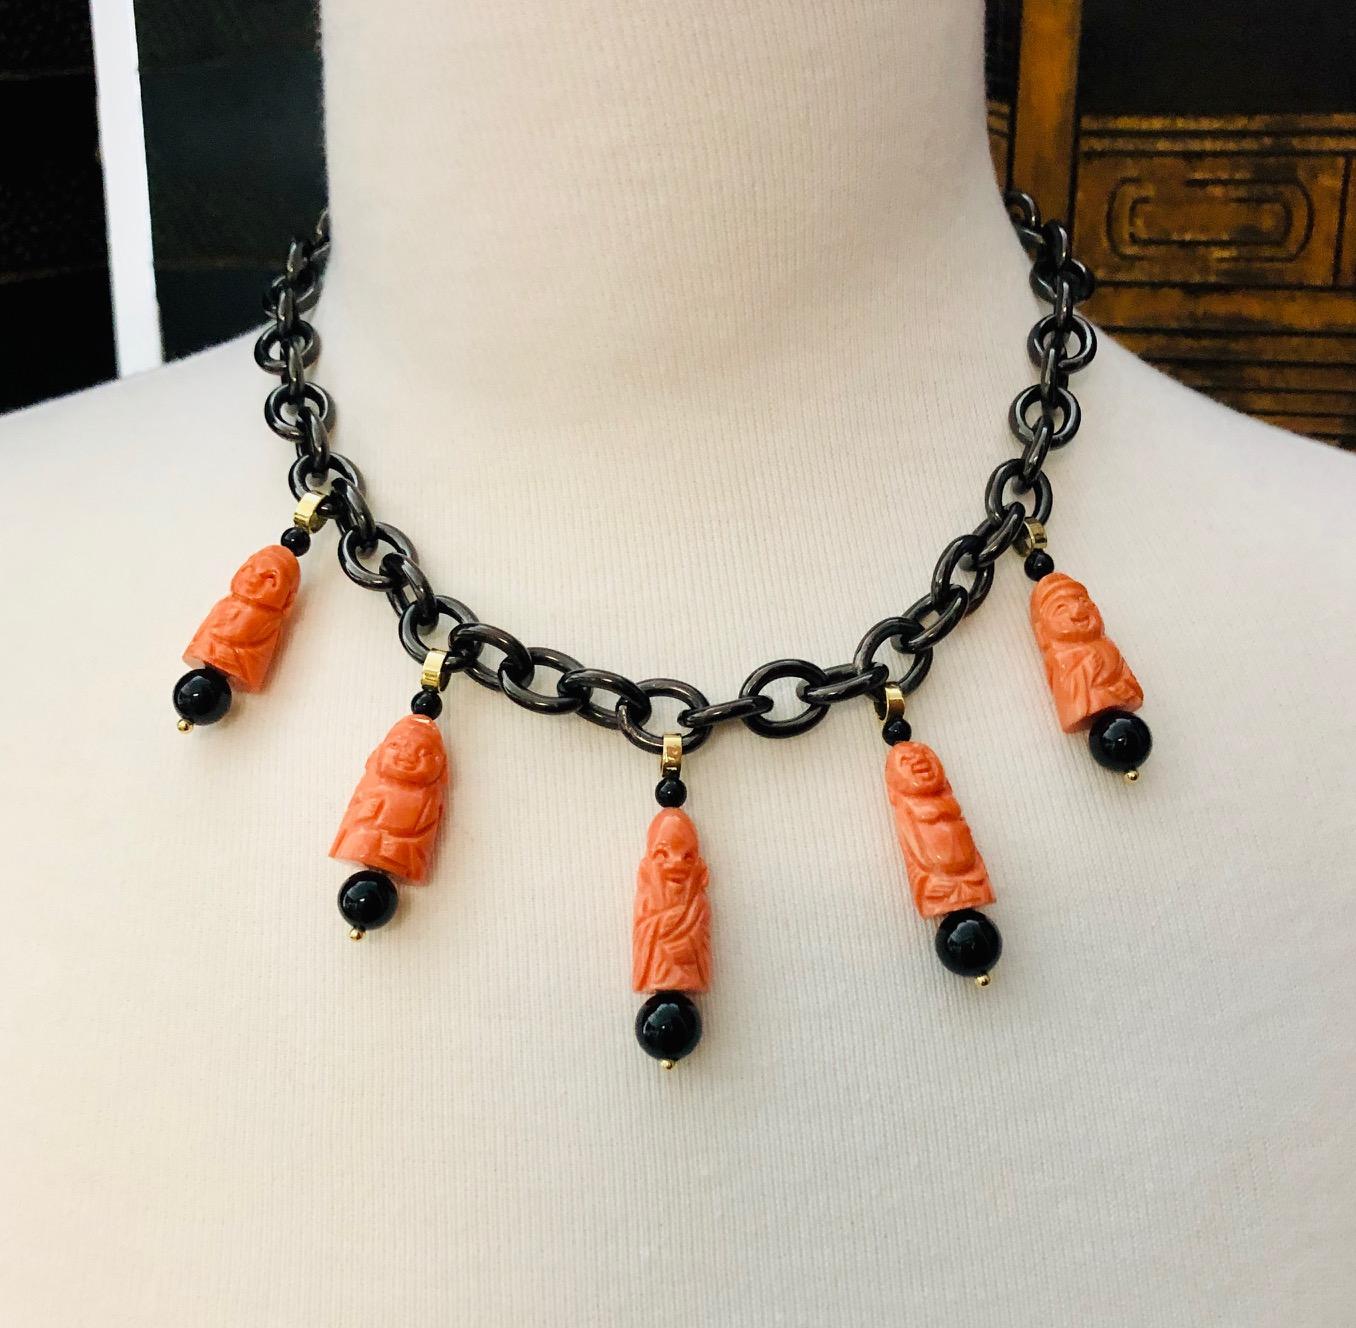 Artisan Hand Carved Italian Coral, Onyx, Yellow Gold Charm Necklace with Blackened Steel